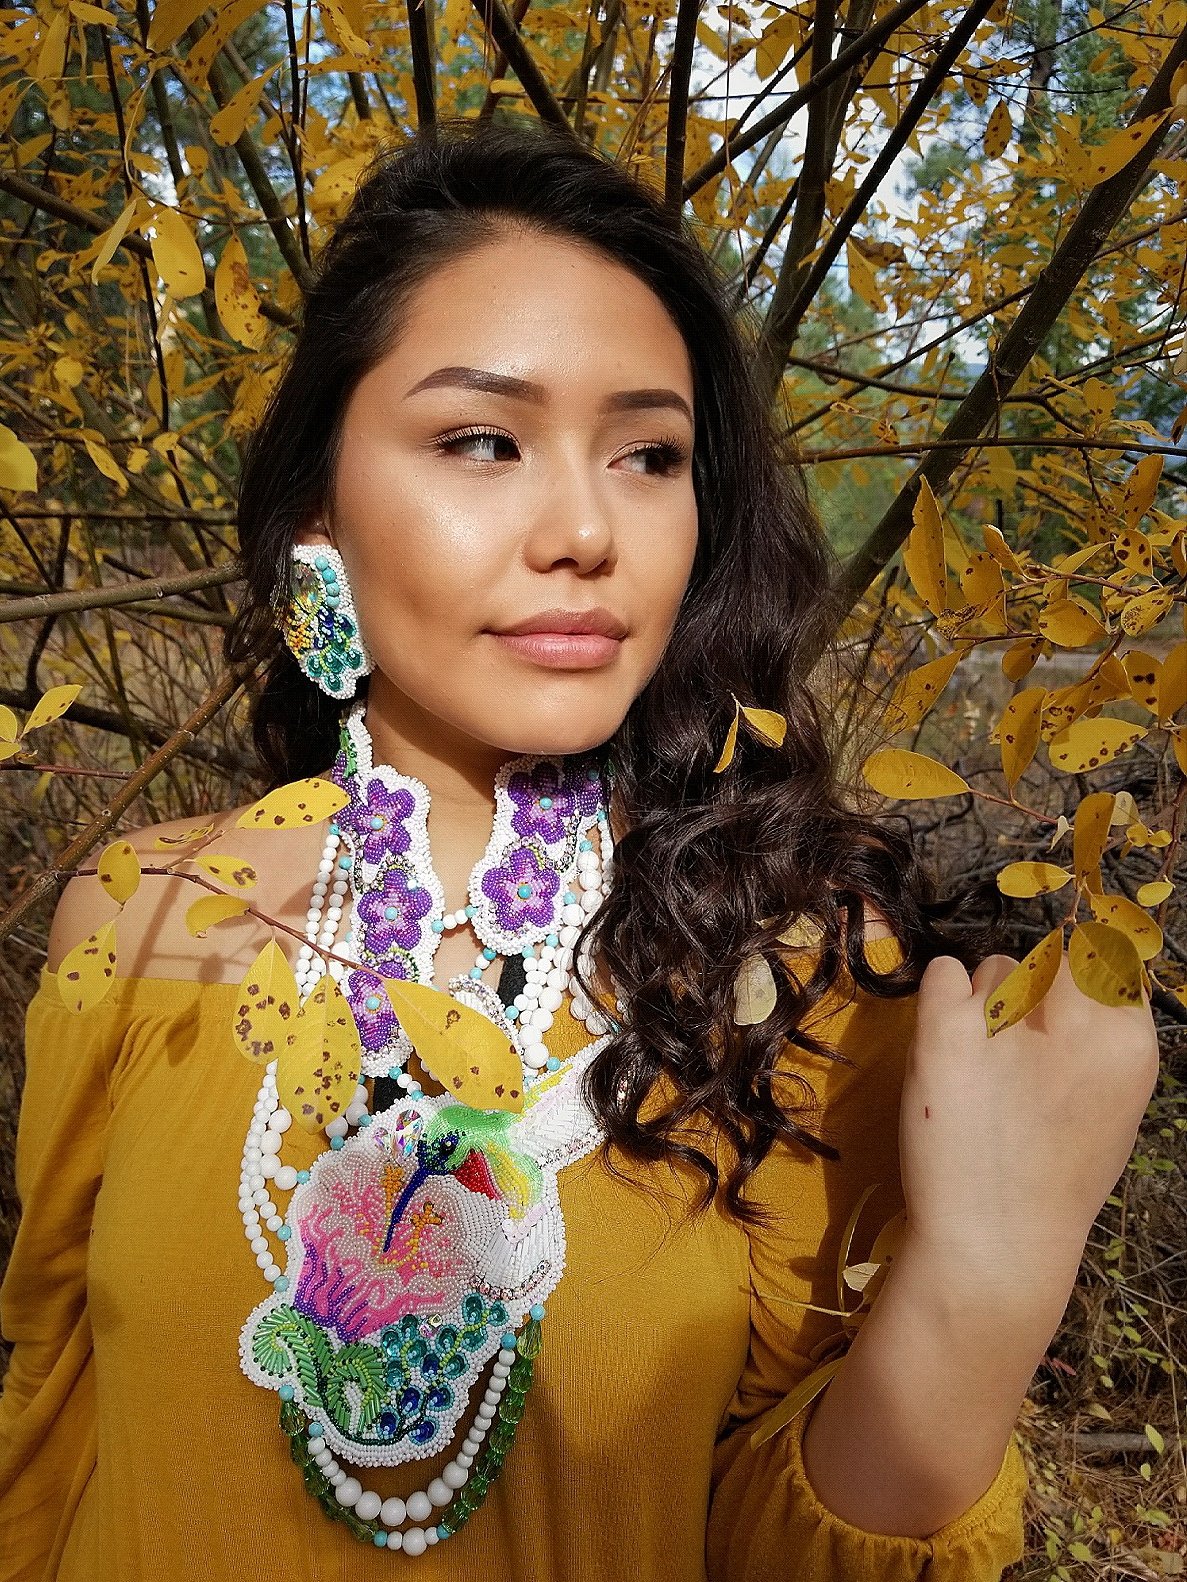 Celebrating Indigenous beauty and resiliency in Edmonton